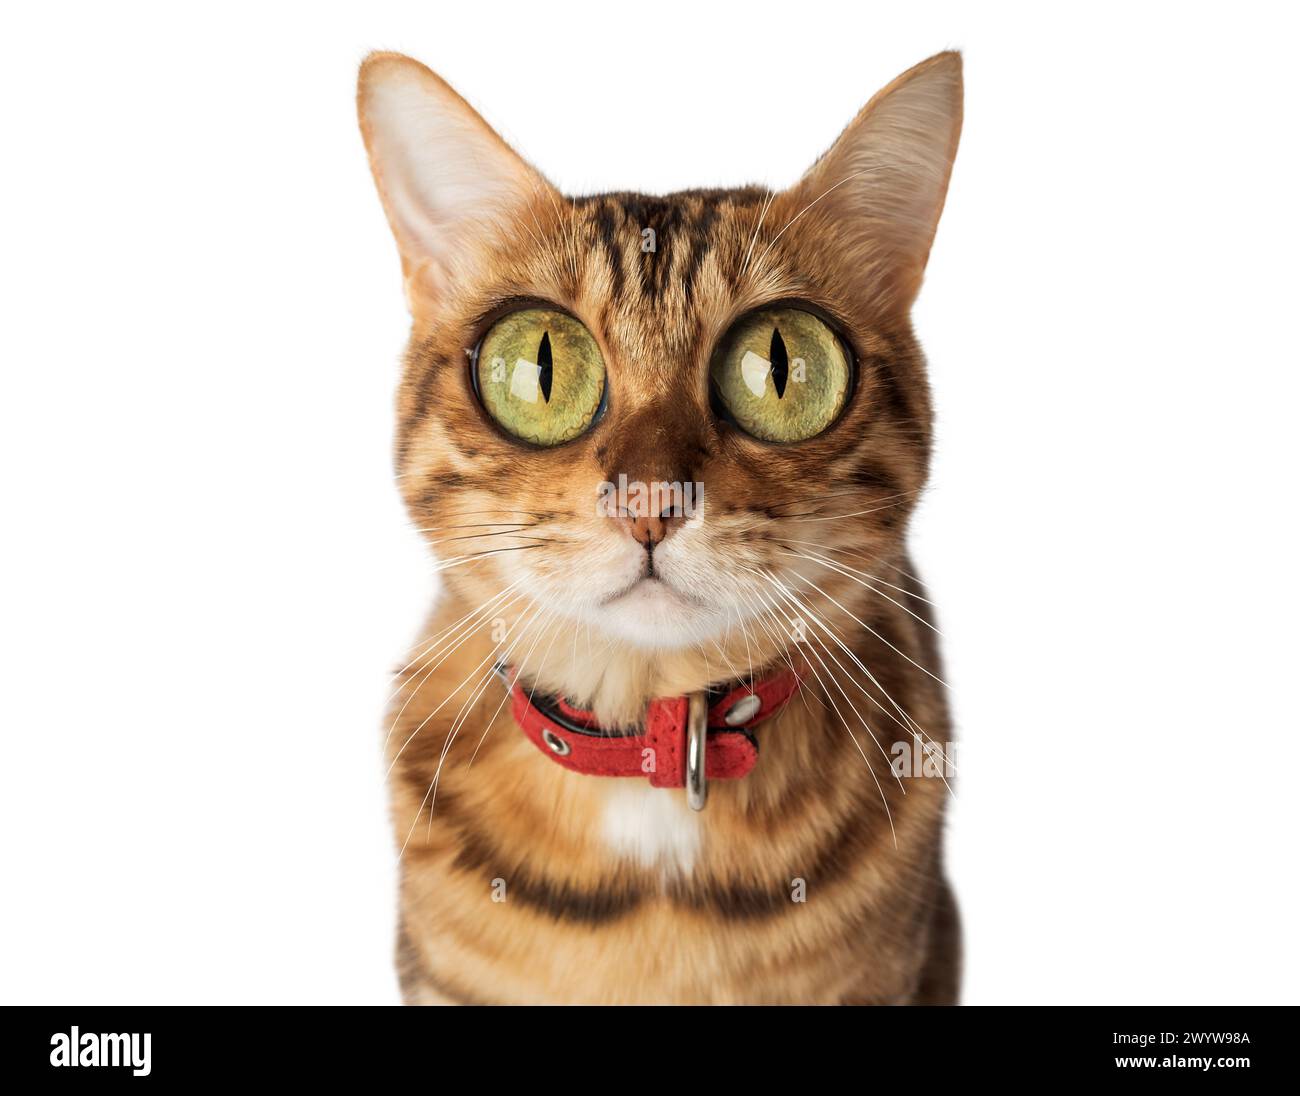 Funny cat with bulging big eyes on a white background. Bengal cat cartoon. Stock Photo